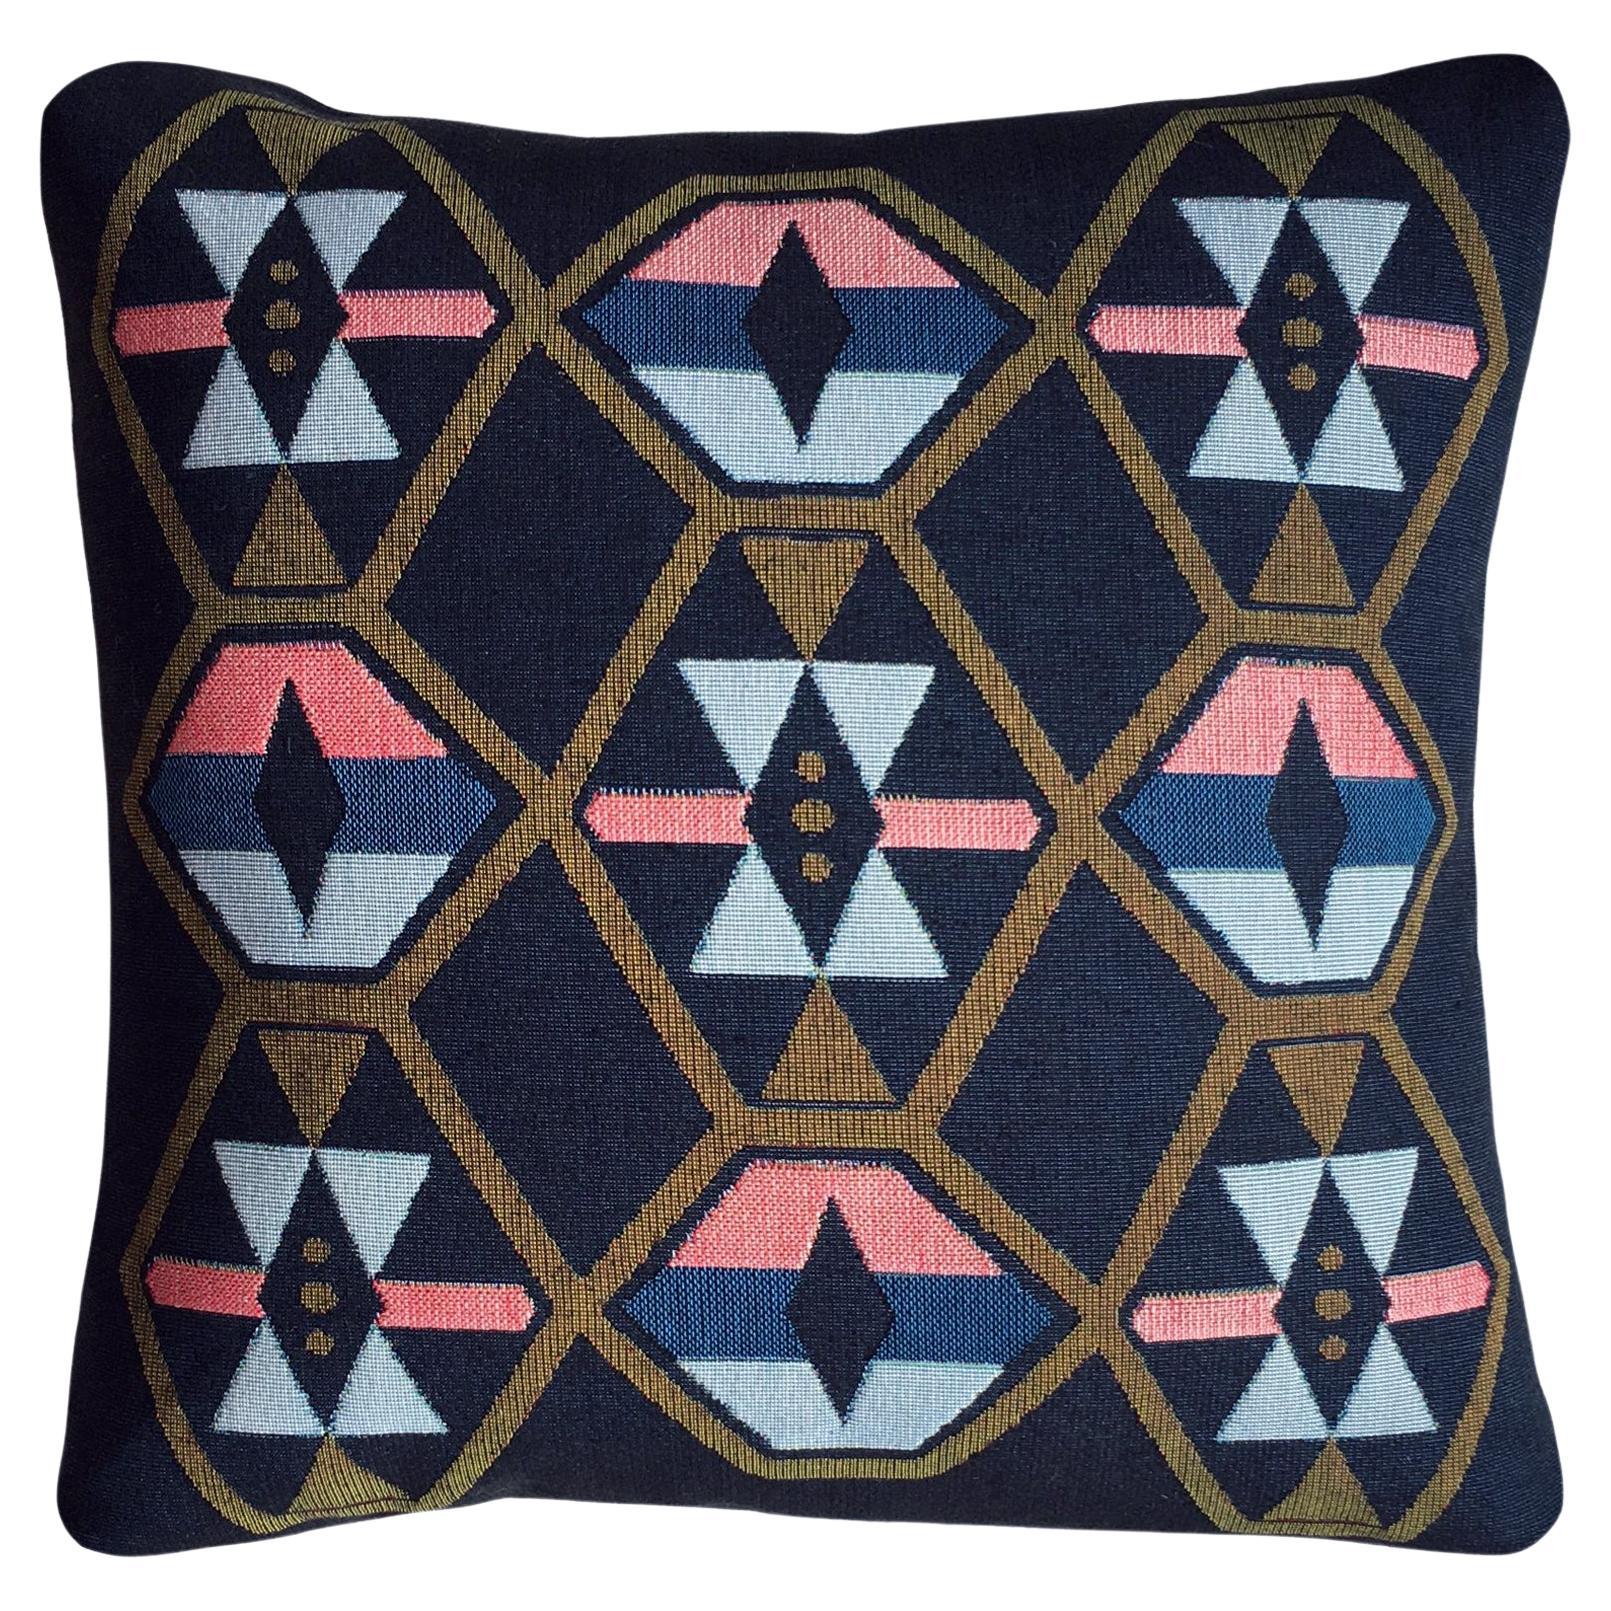 Loom Woven Throw Pillow, Twilight Navy Geo For Sale